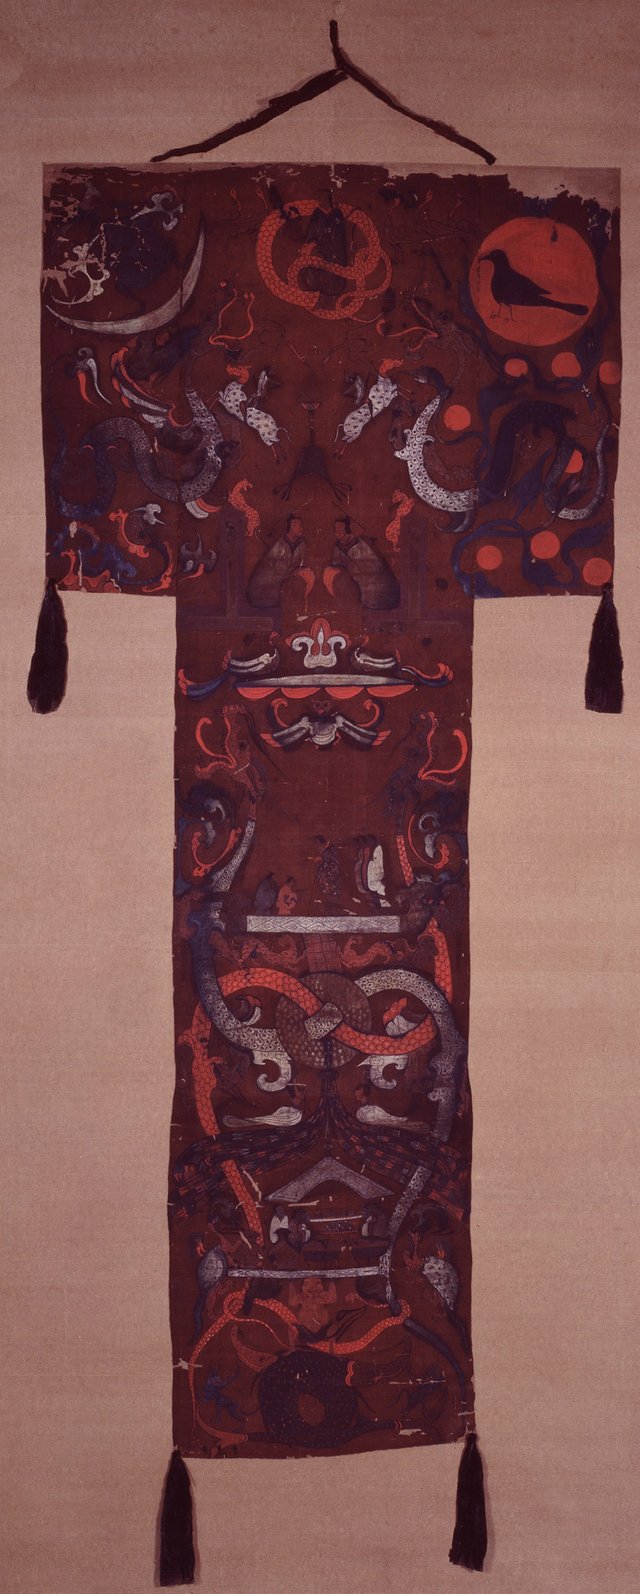 A silk banner from Mawangdui, Changsha, Hunan province; it was draped over the coffin of Lady Dai (d. 168 BCE), wife of the Marquess Li Cang (利蒼) (d. 186 BCE), chancellor for the Kingdom of Changsha.